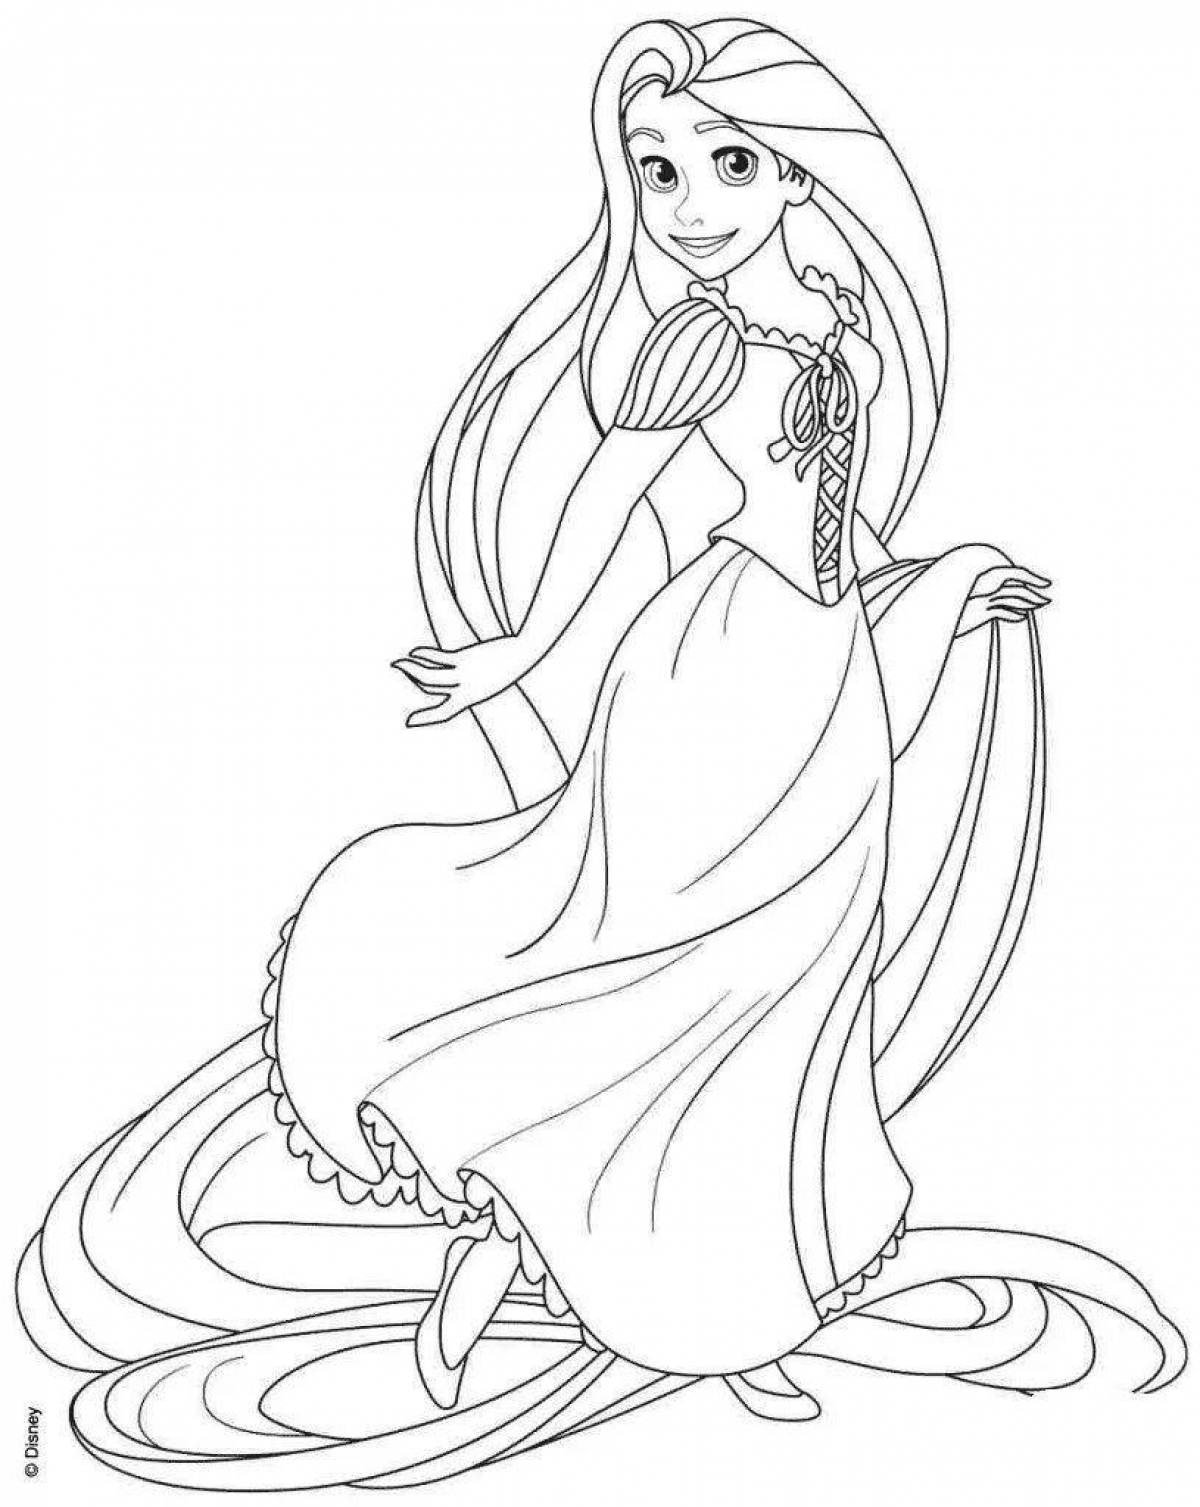 Amazing rapunzel coloring book for kids